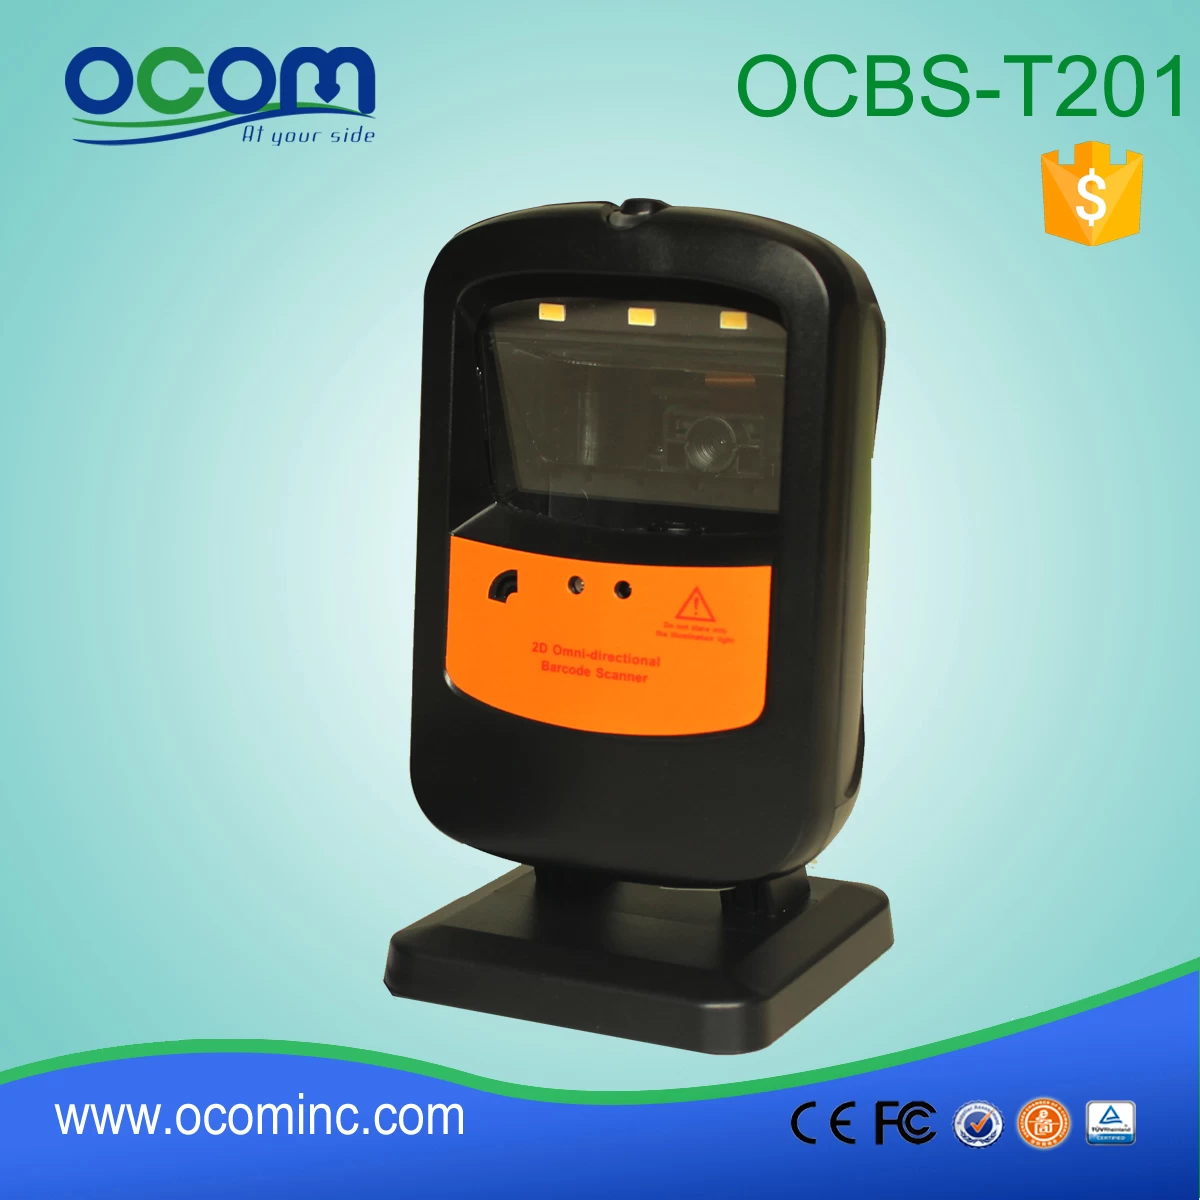 OCBS-T201:flatbed barcode scanner price, china barcode scanner